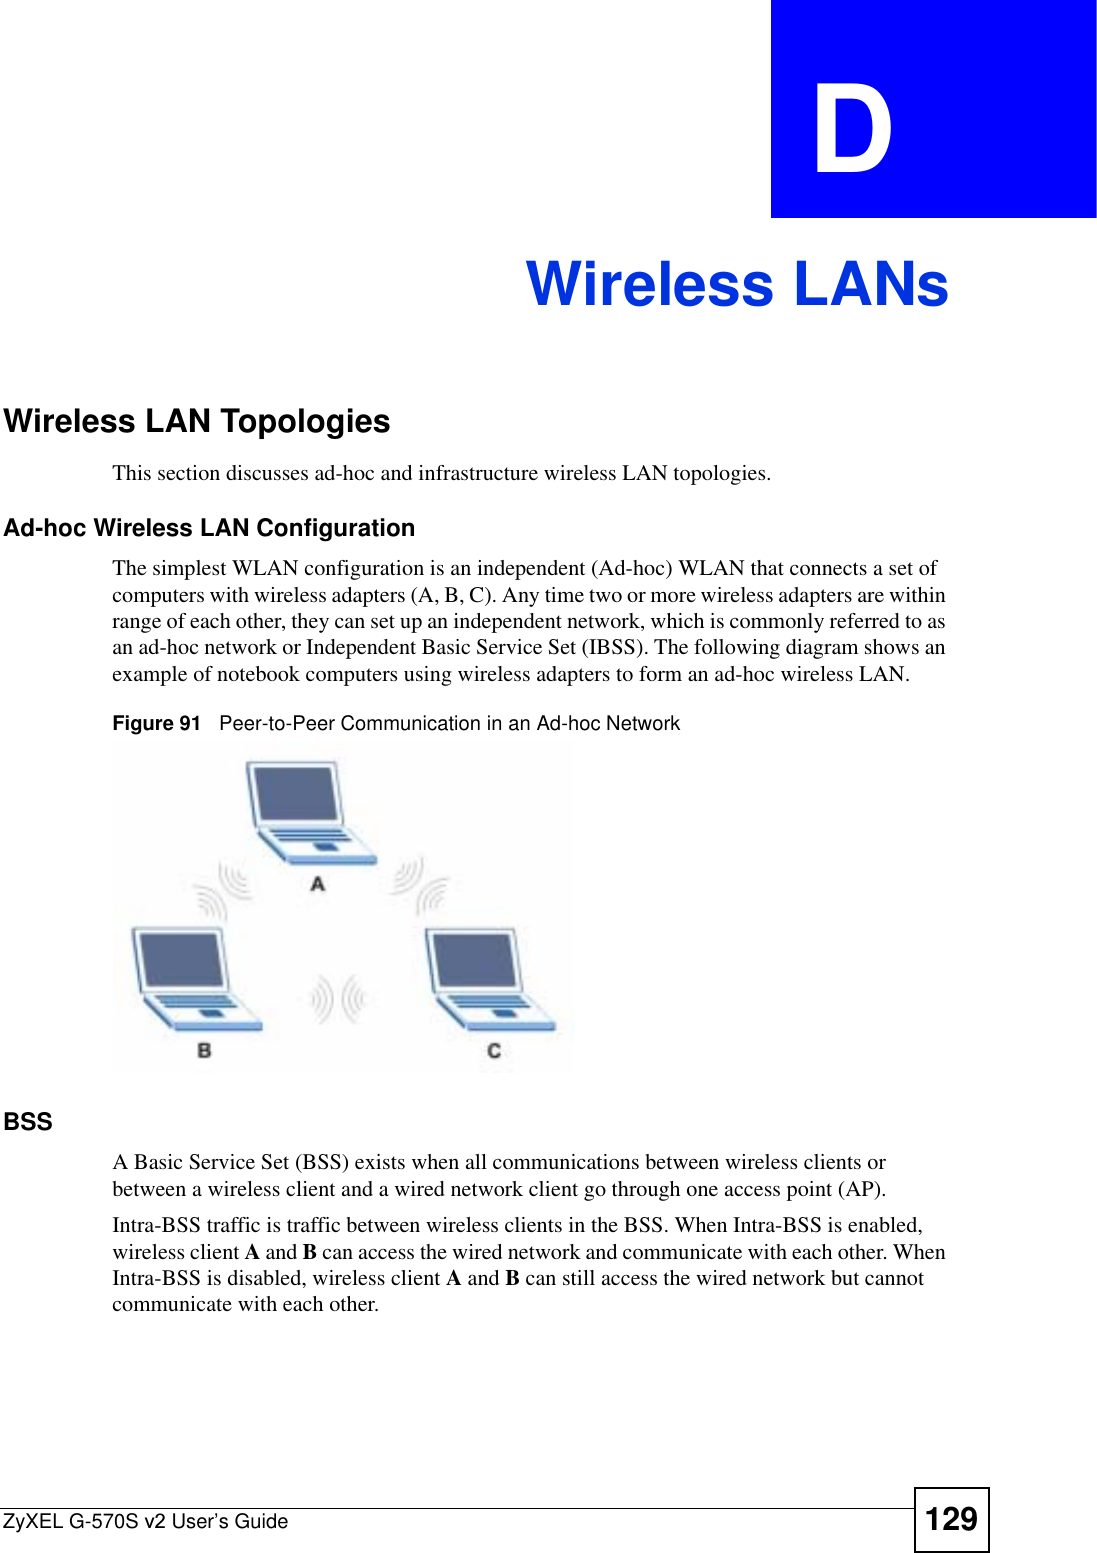 ZyXEL G-570S v2 User’s Guide 129APPENDIX  D Wireless LANsWireless LAN TopologiesThis section discusses ad-hoc and infrastructure wireless LAN topologies.Ad-hoc Wireless LAN ConfigurationThe simplest WLAN configuration is an independent (Ad-hoc) WLAN that connects a set of computers with wireless adapters (A, B, C). Any time two or more wireless adapters are within range of each other, they can set up an independent network, which is commonly referred to as an ad-hoc network or Independent Basic Service Set (IBSS). The following diagram shows an example of notebook computers using wireless adapters to form an ad-hoc wireless LAN. Figure 91   Peer-to-Peer Communication in an Ad-hoc NetworkBSSA Basic Service Set (BSS) exists when all communications between wireless clients or between a wireless client and a wired network client go through one access point (AP). Intra-BSS traffic is traffic between wireless clients in the BSS. When Intra-BSS is enabled, wireless client A and B can access the wired network and communicate with each other. When Intra-BSS is disabled, wireless client A and B can still access the wired network but cannot communicate with each other.